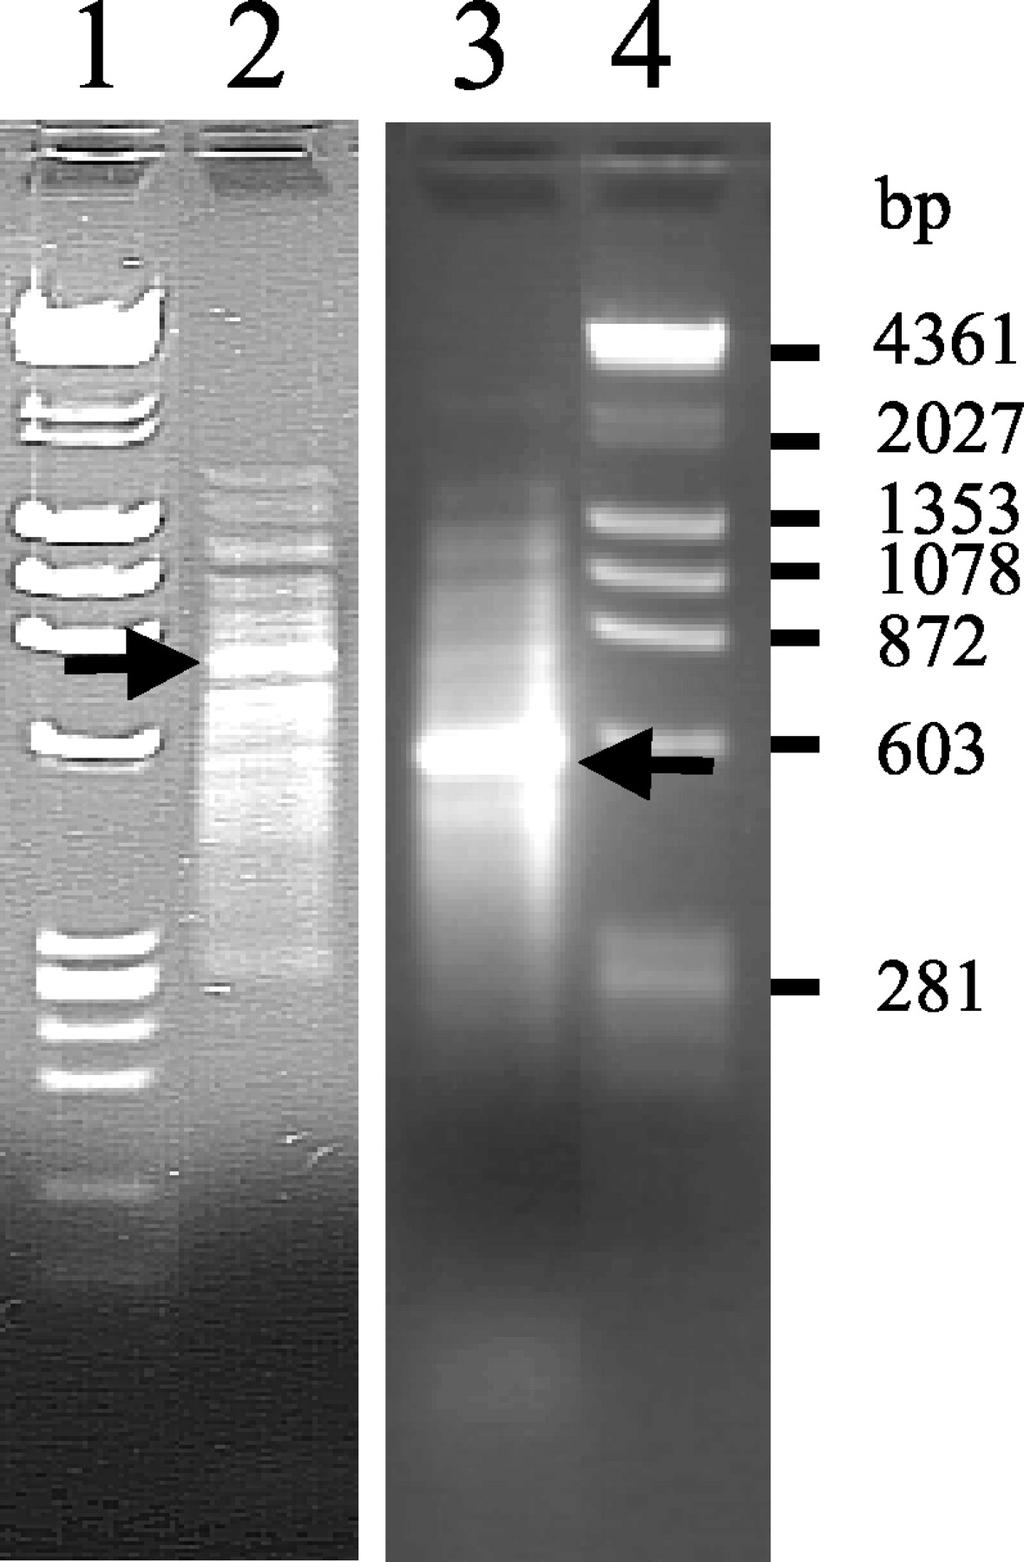 PCR products of subtractive lung squamous cell carcinoma cdna libraries generated either by a 4- base or a pool of 6-base recognizing restriction enzymes.